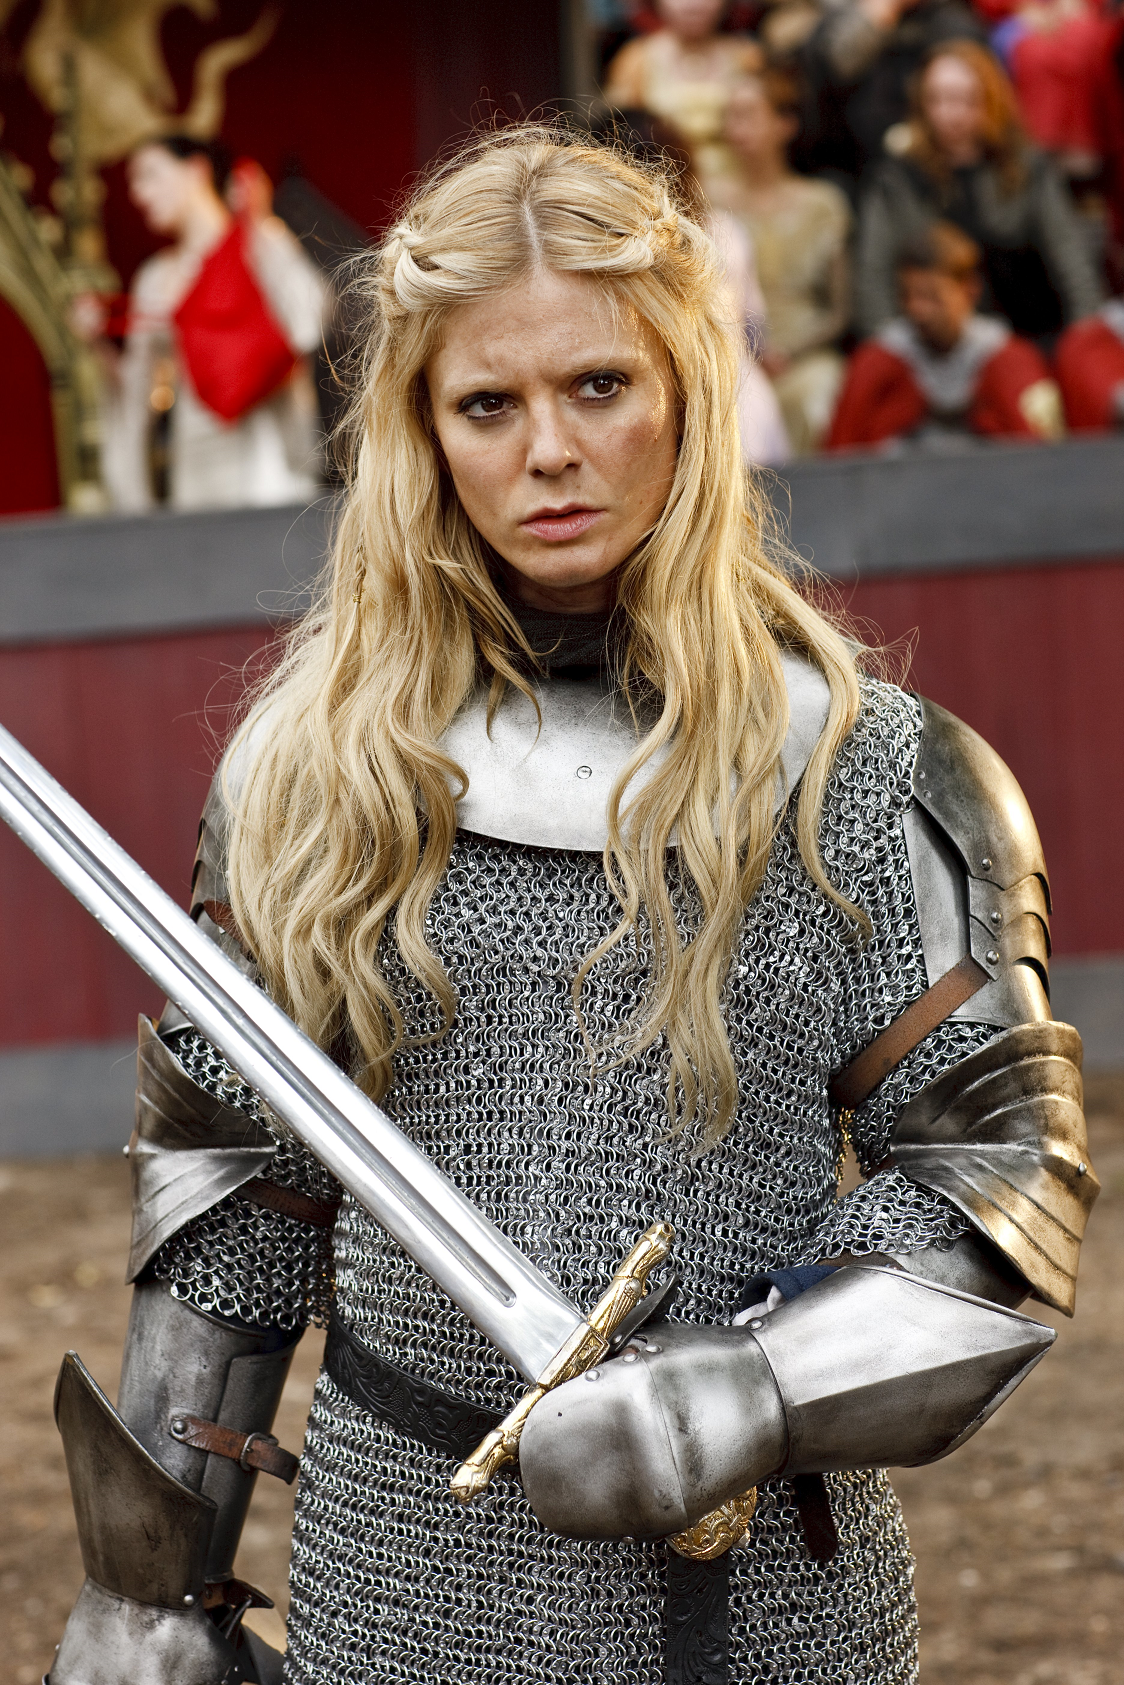 Morgause in The Sins of the Father